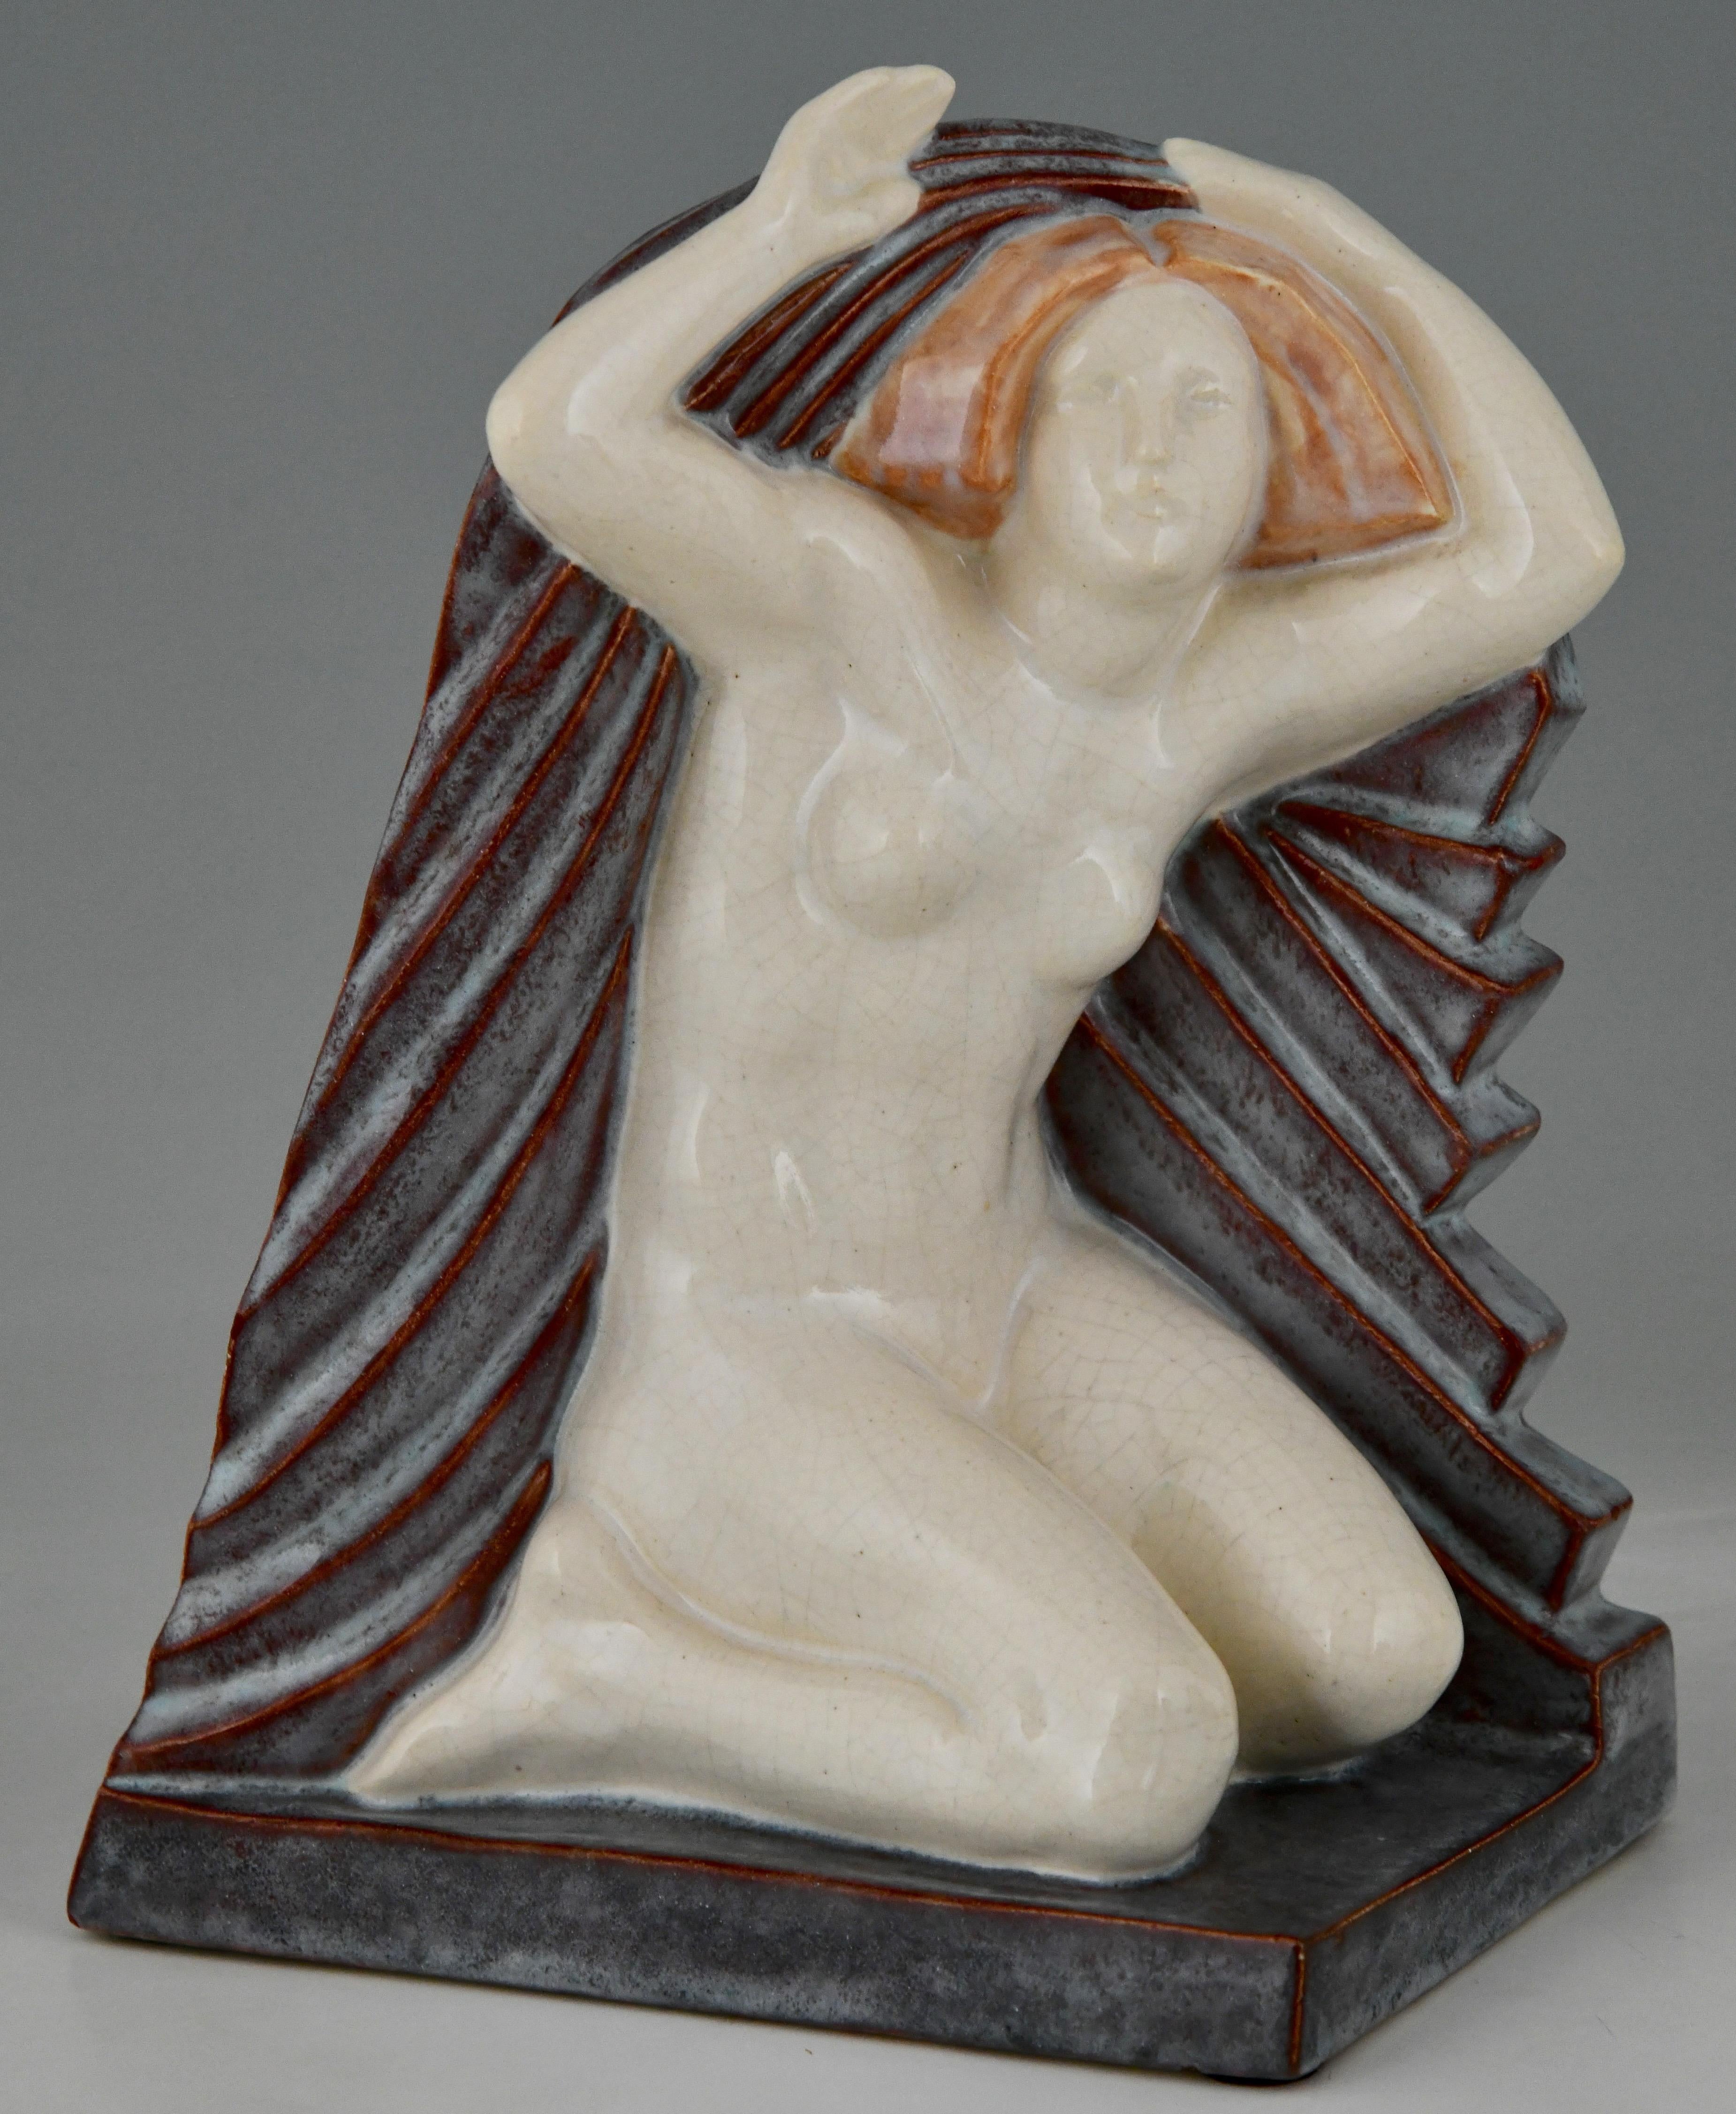 Ceramic Art Deco Set with Seated Nudes by Narezo for Kaza Editions 1925